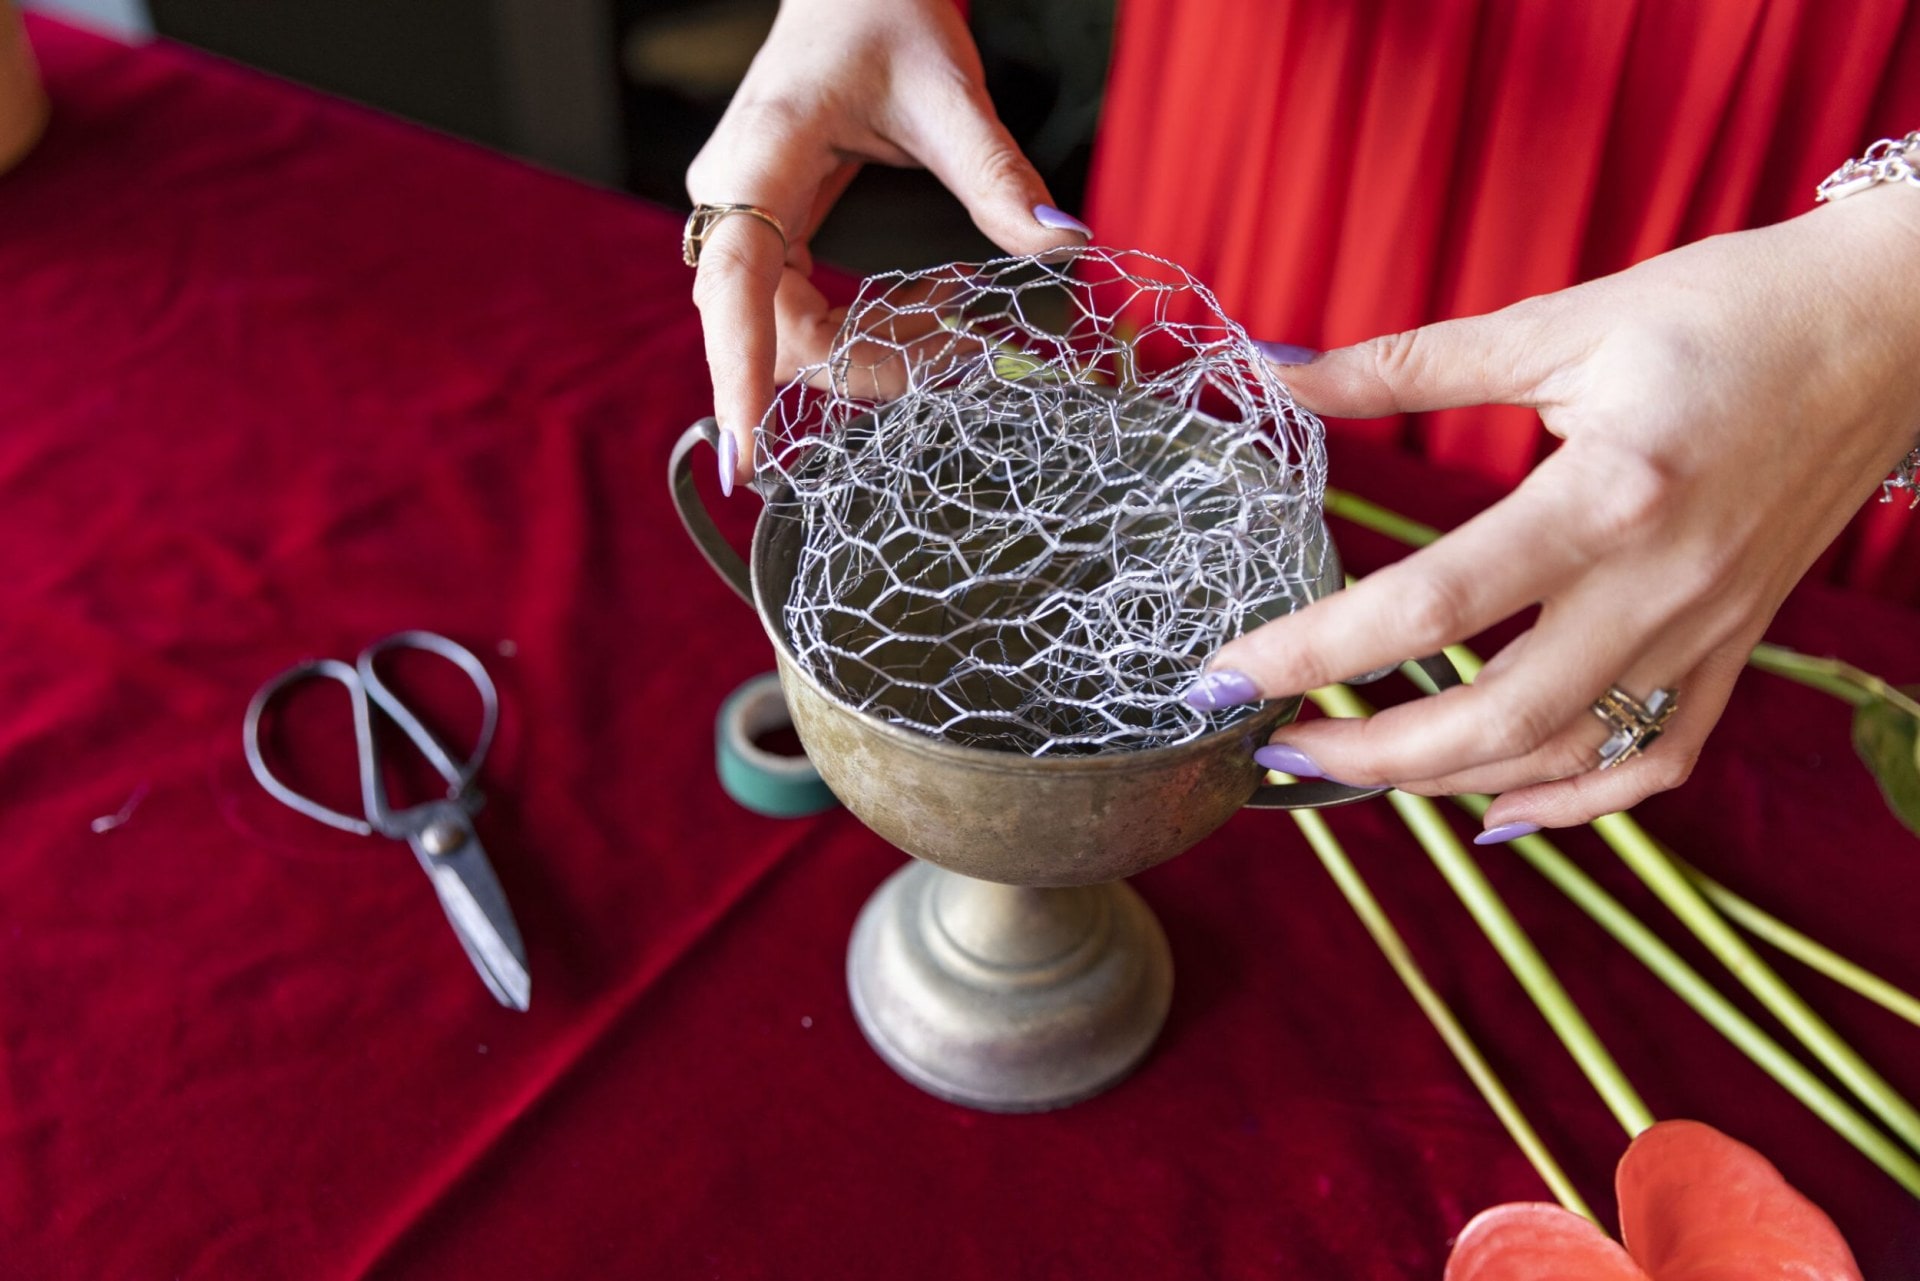 A ball of chicken wire mesh being placed in an urn